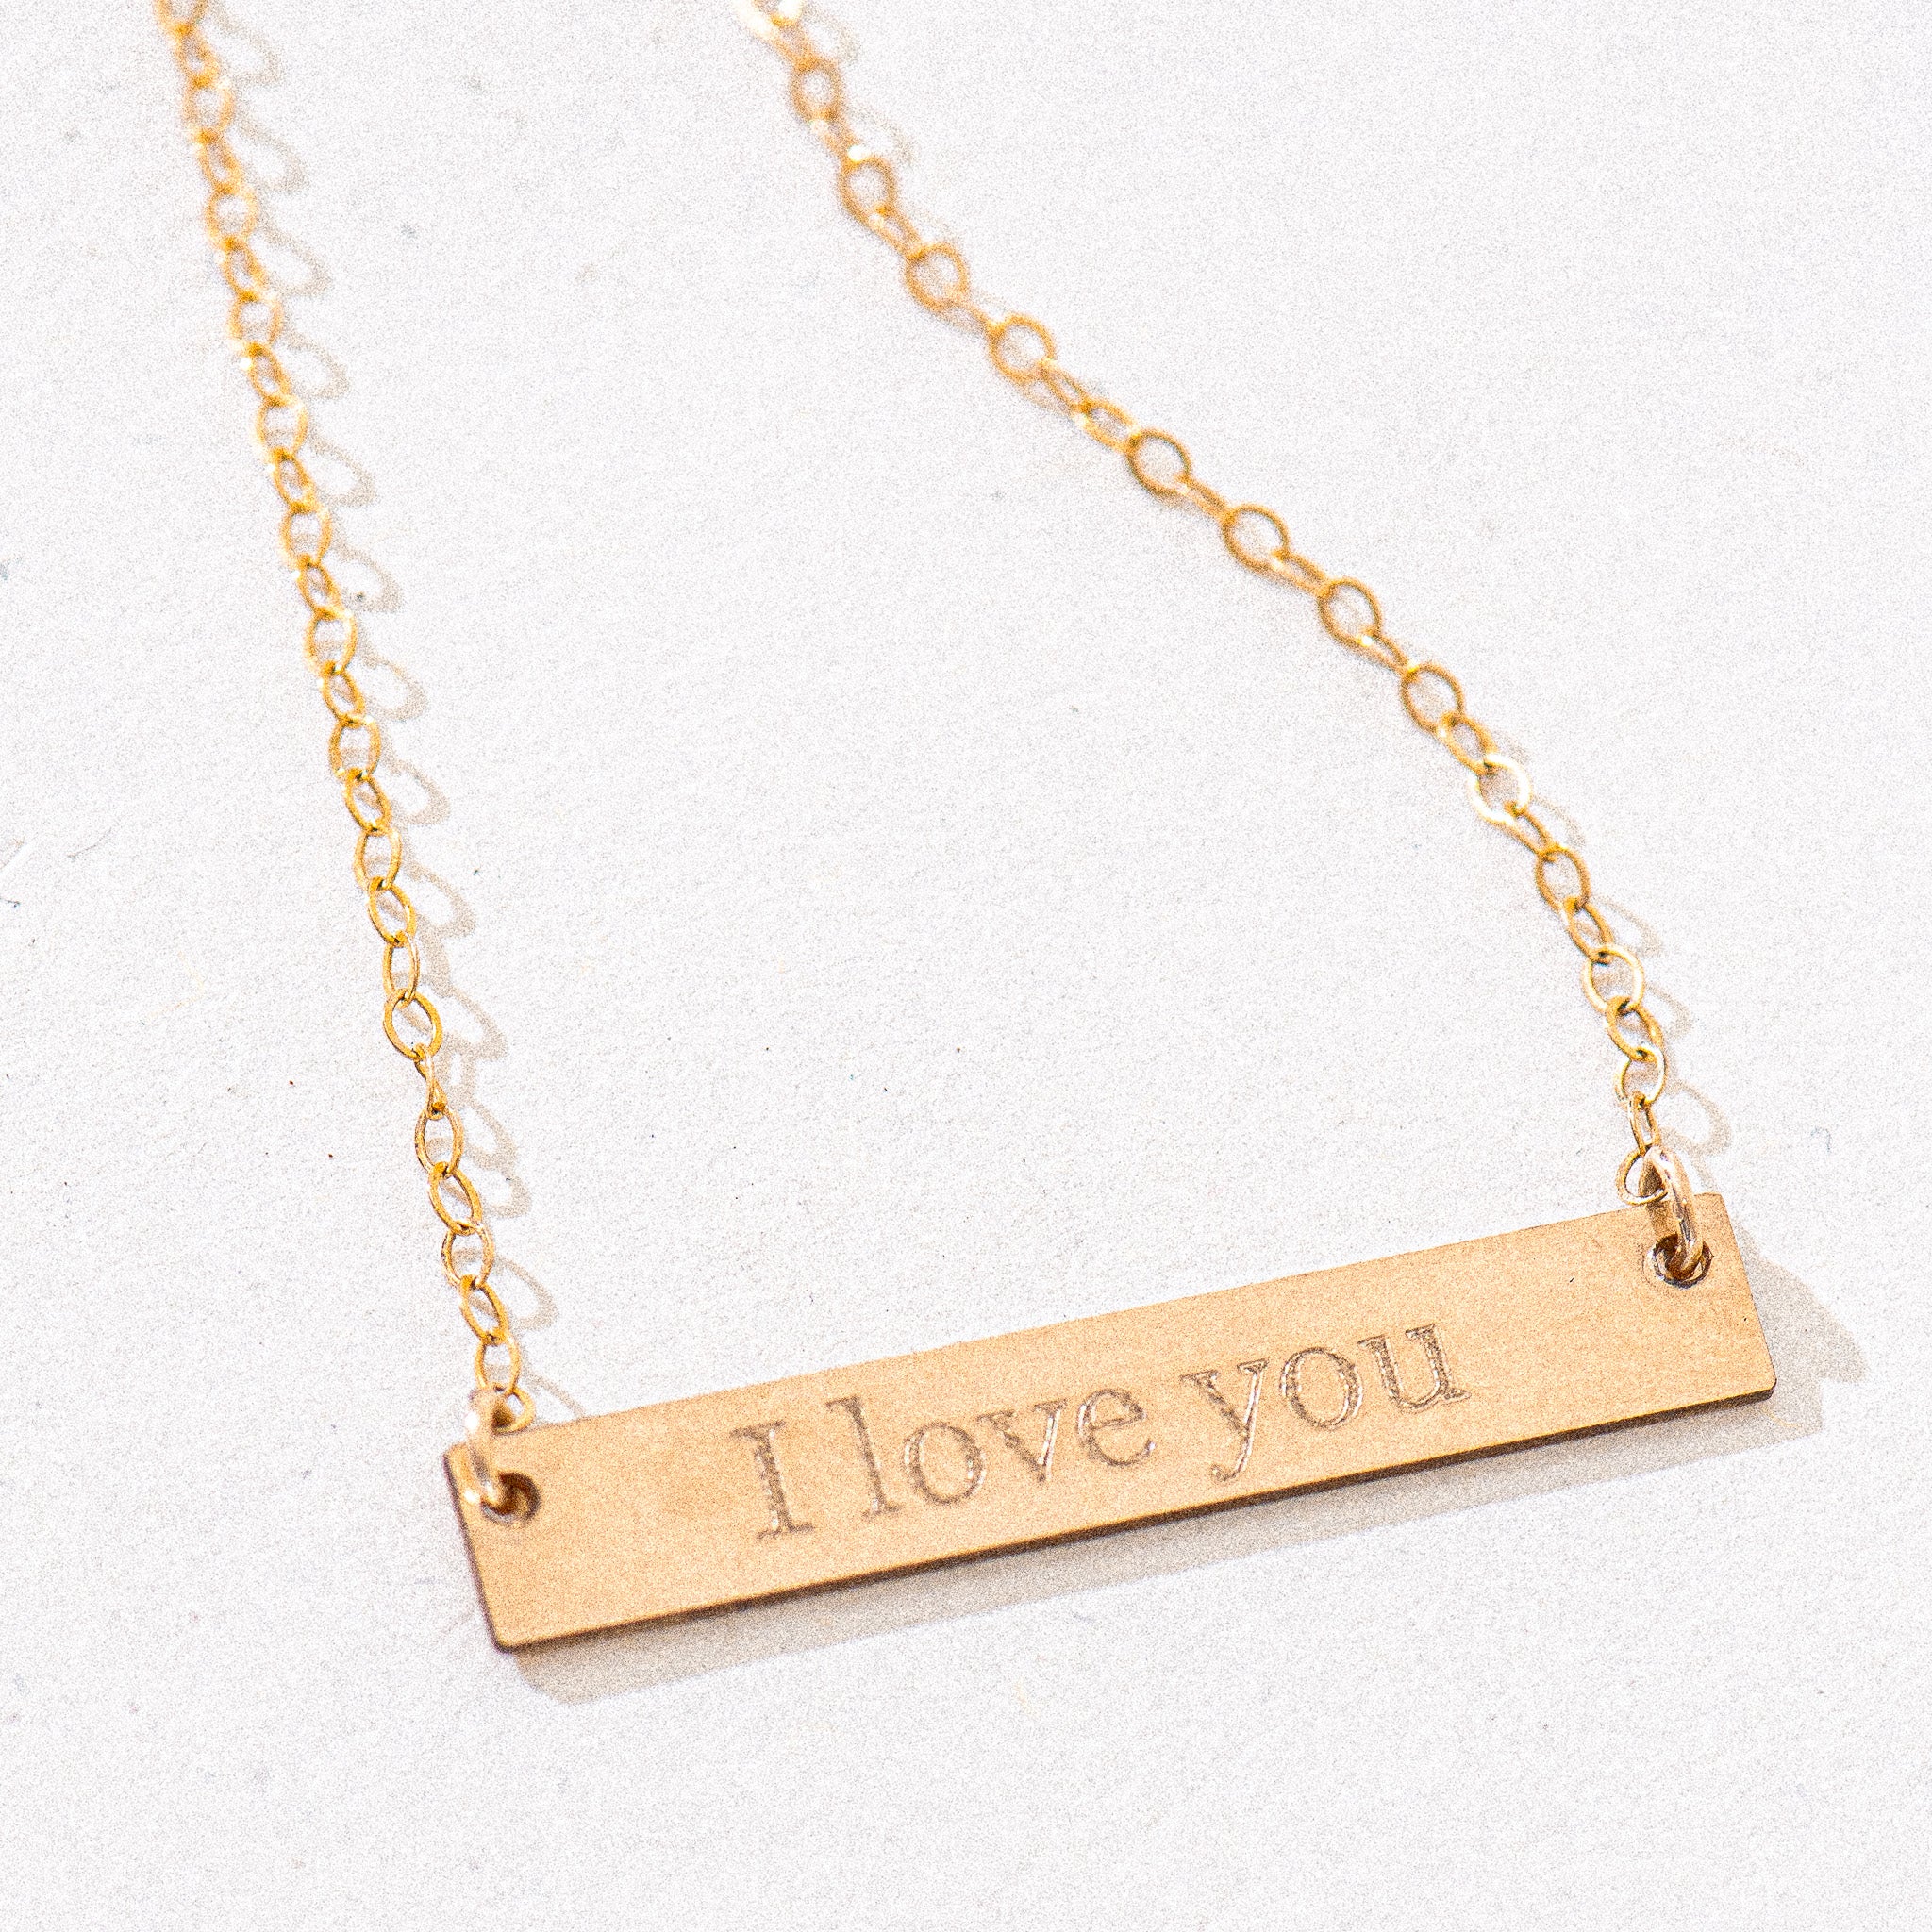 I Love You Bar Necklace